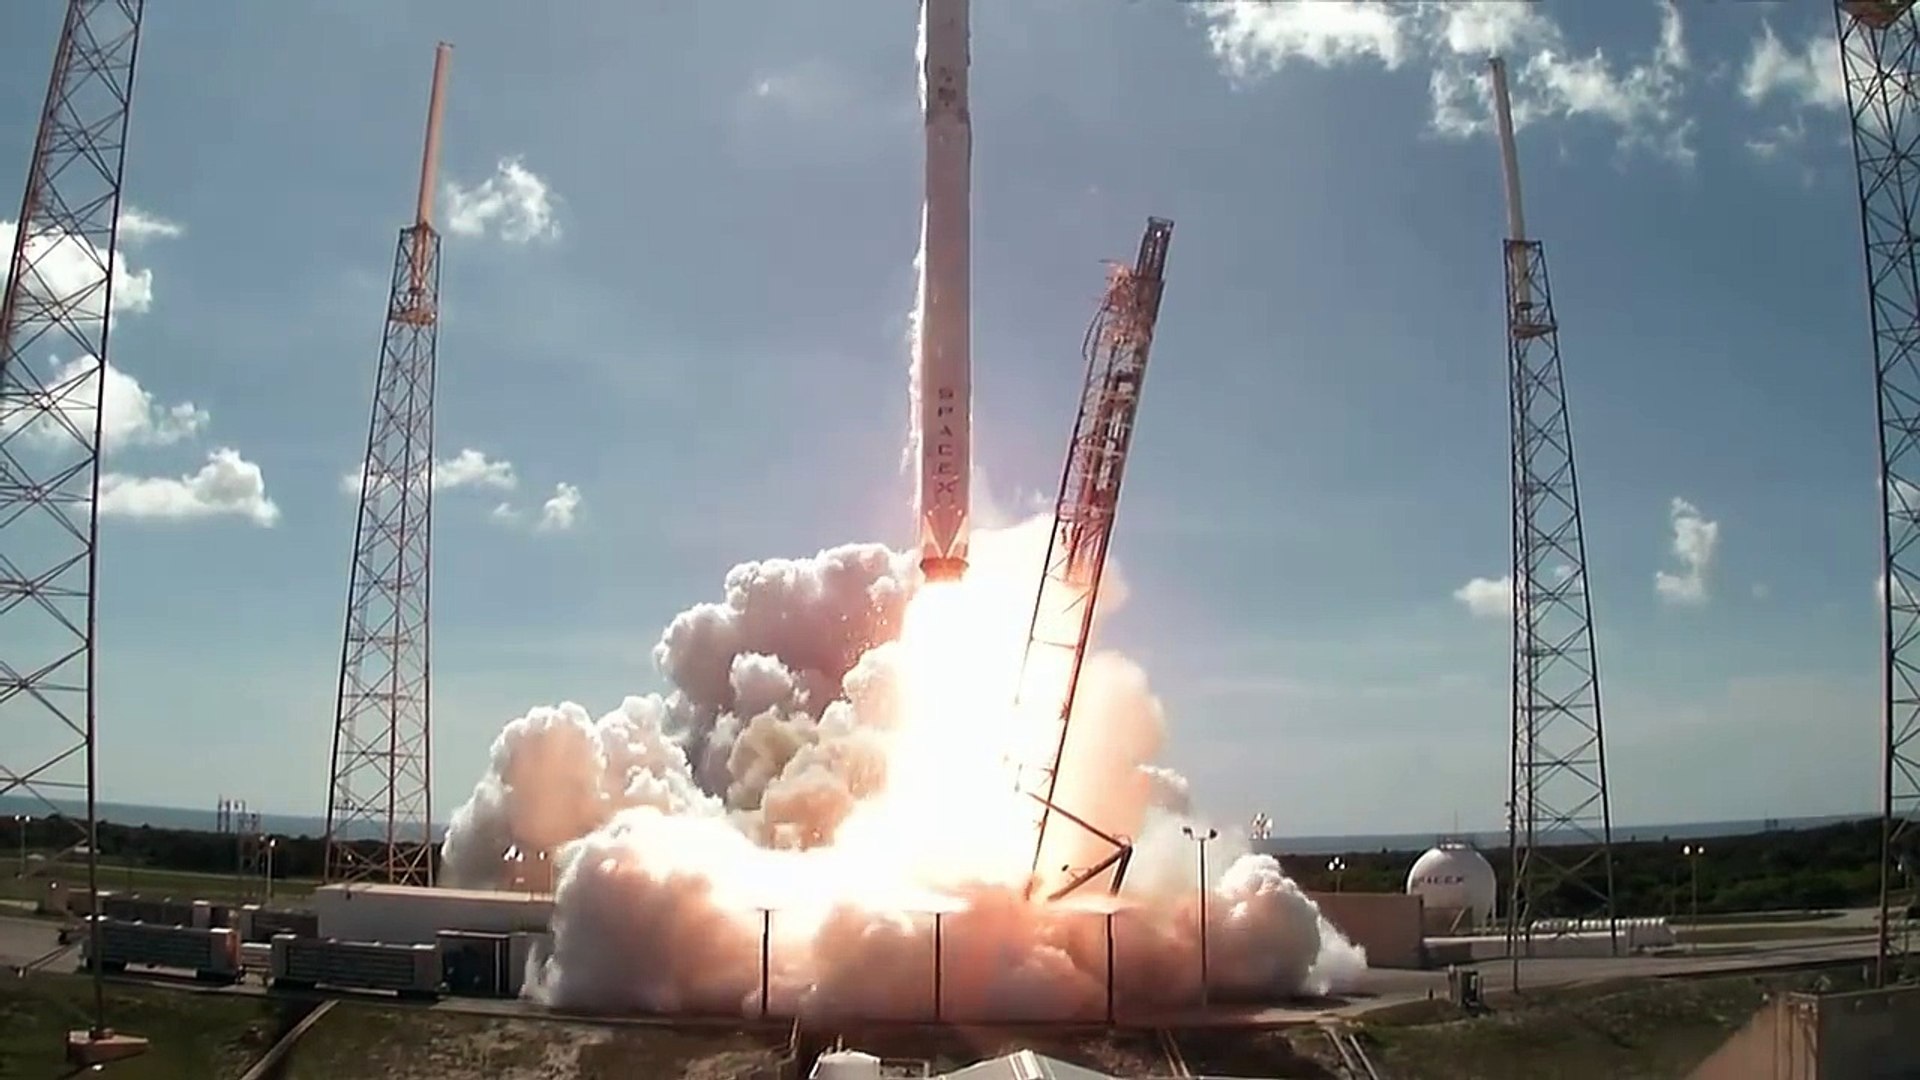 SpaceX CRS-7, the company's seventh launch of its Falcon 9 rocket, took off from Vandenberg Air Forc